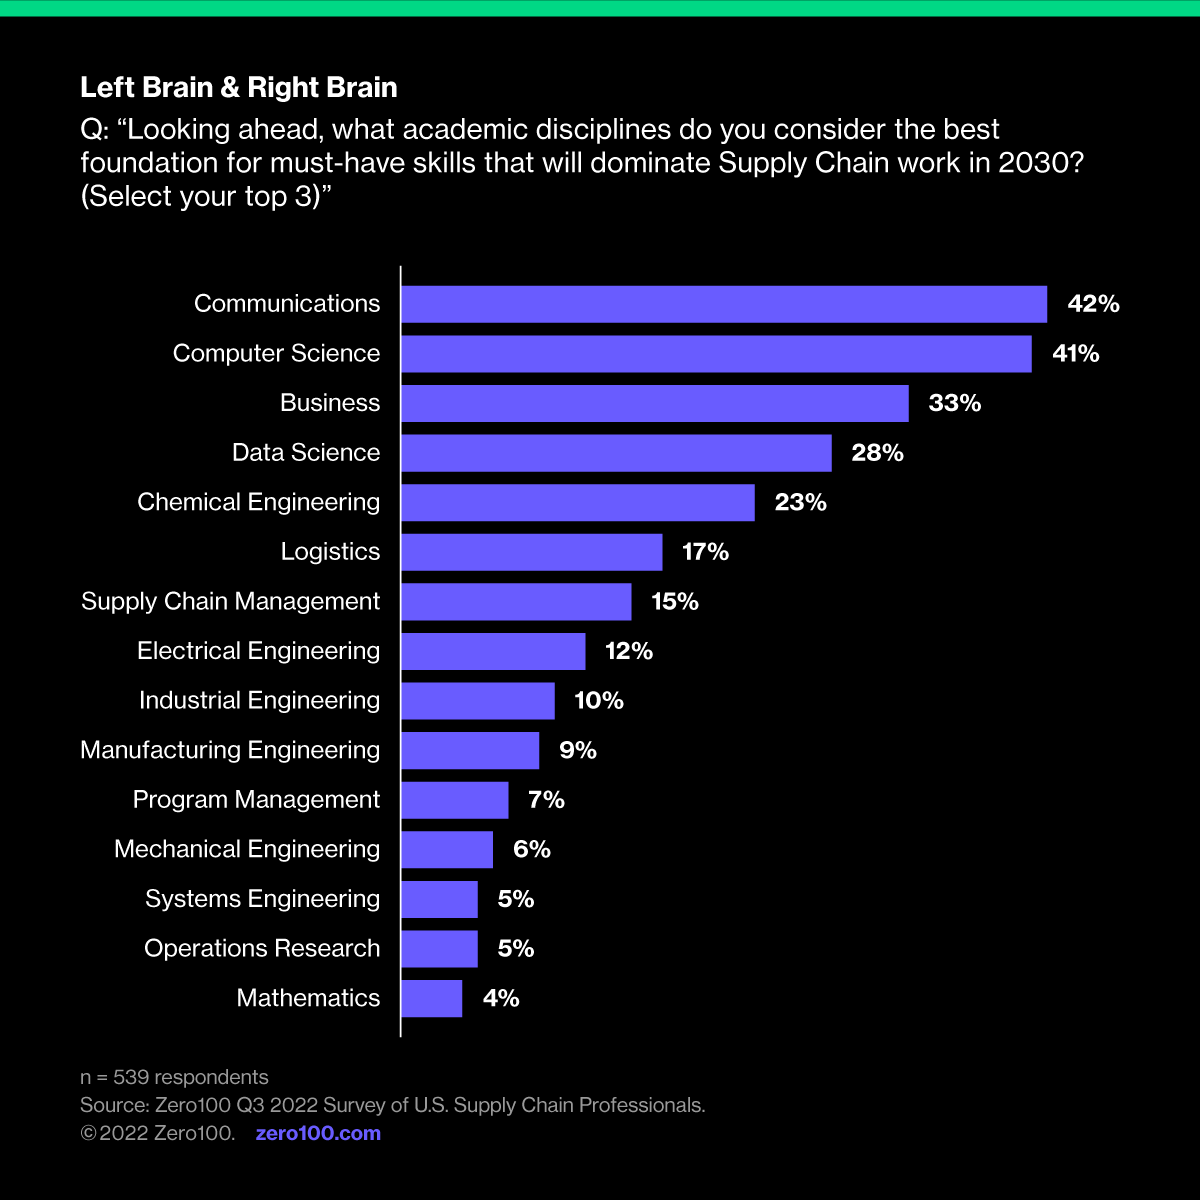 Graph depicting survey answers to the question "Looking ahead, what academic disciplines do you consider the best foundation for must-have skills that will dominate Supply Chain work in 2030?" Source: Zero100 Q3 2022 Survey of U.S. Supply Chain Professionals.